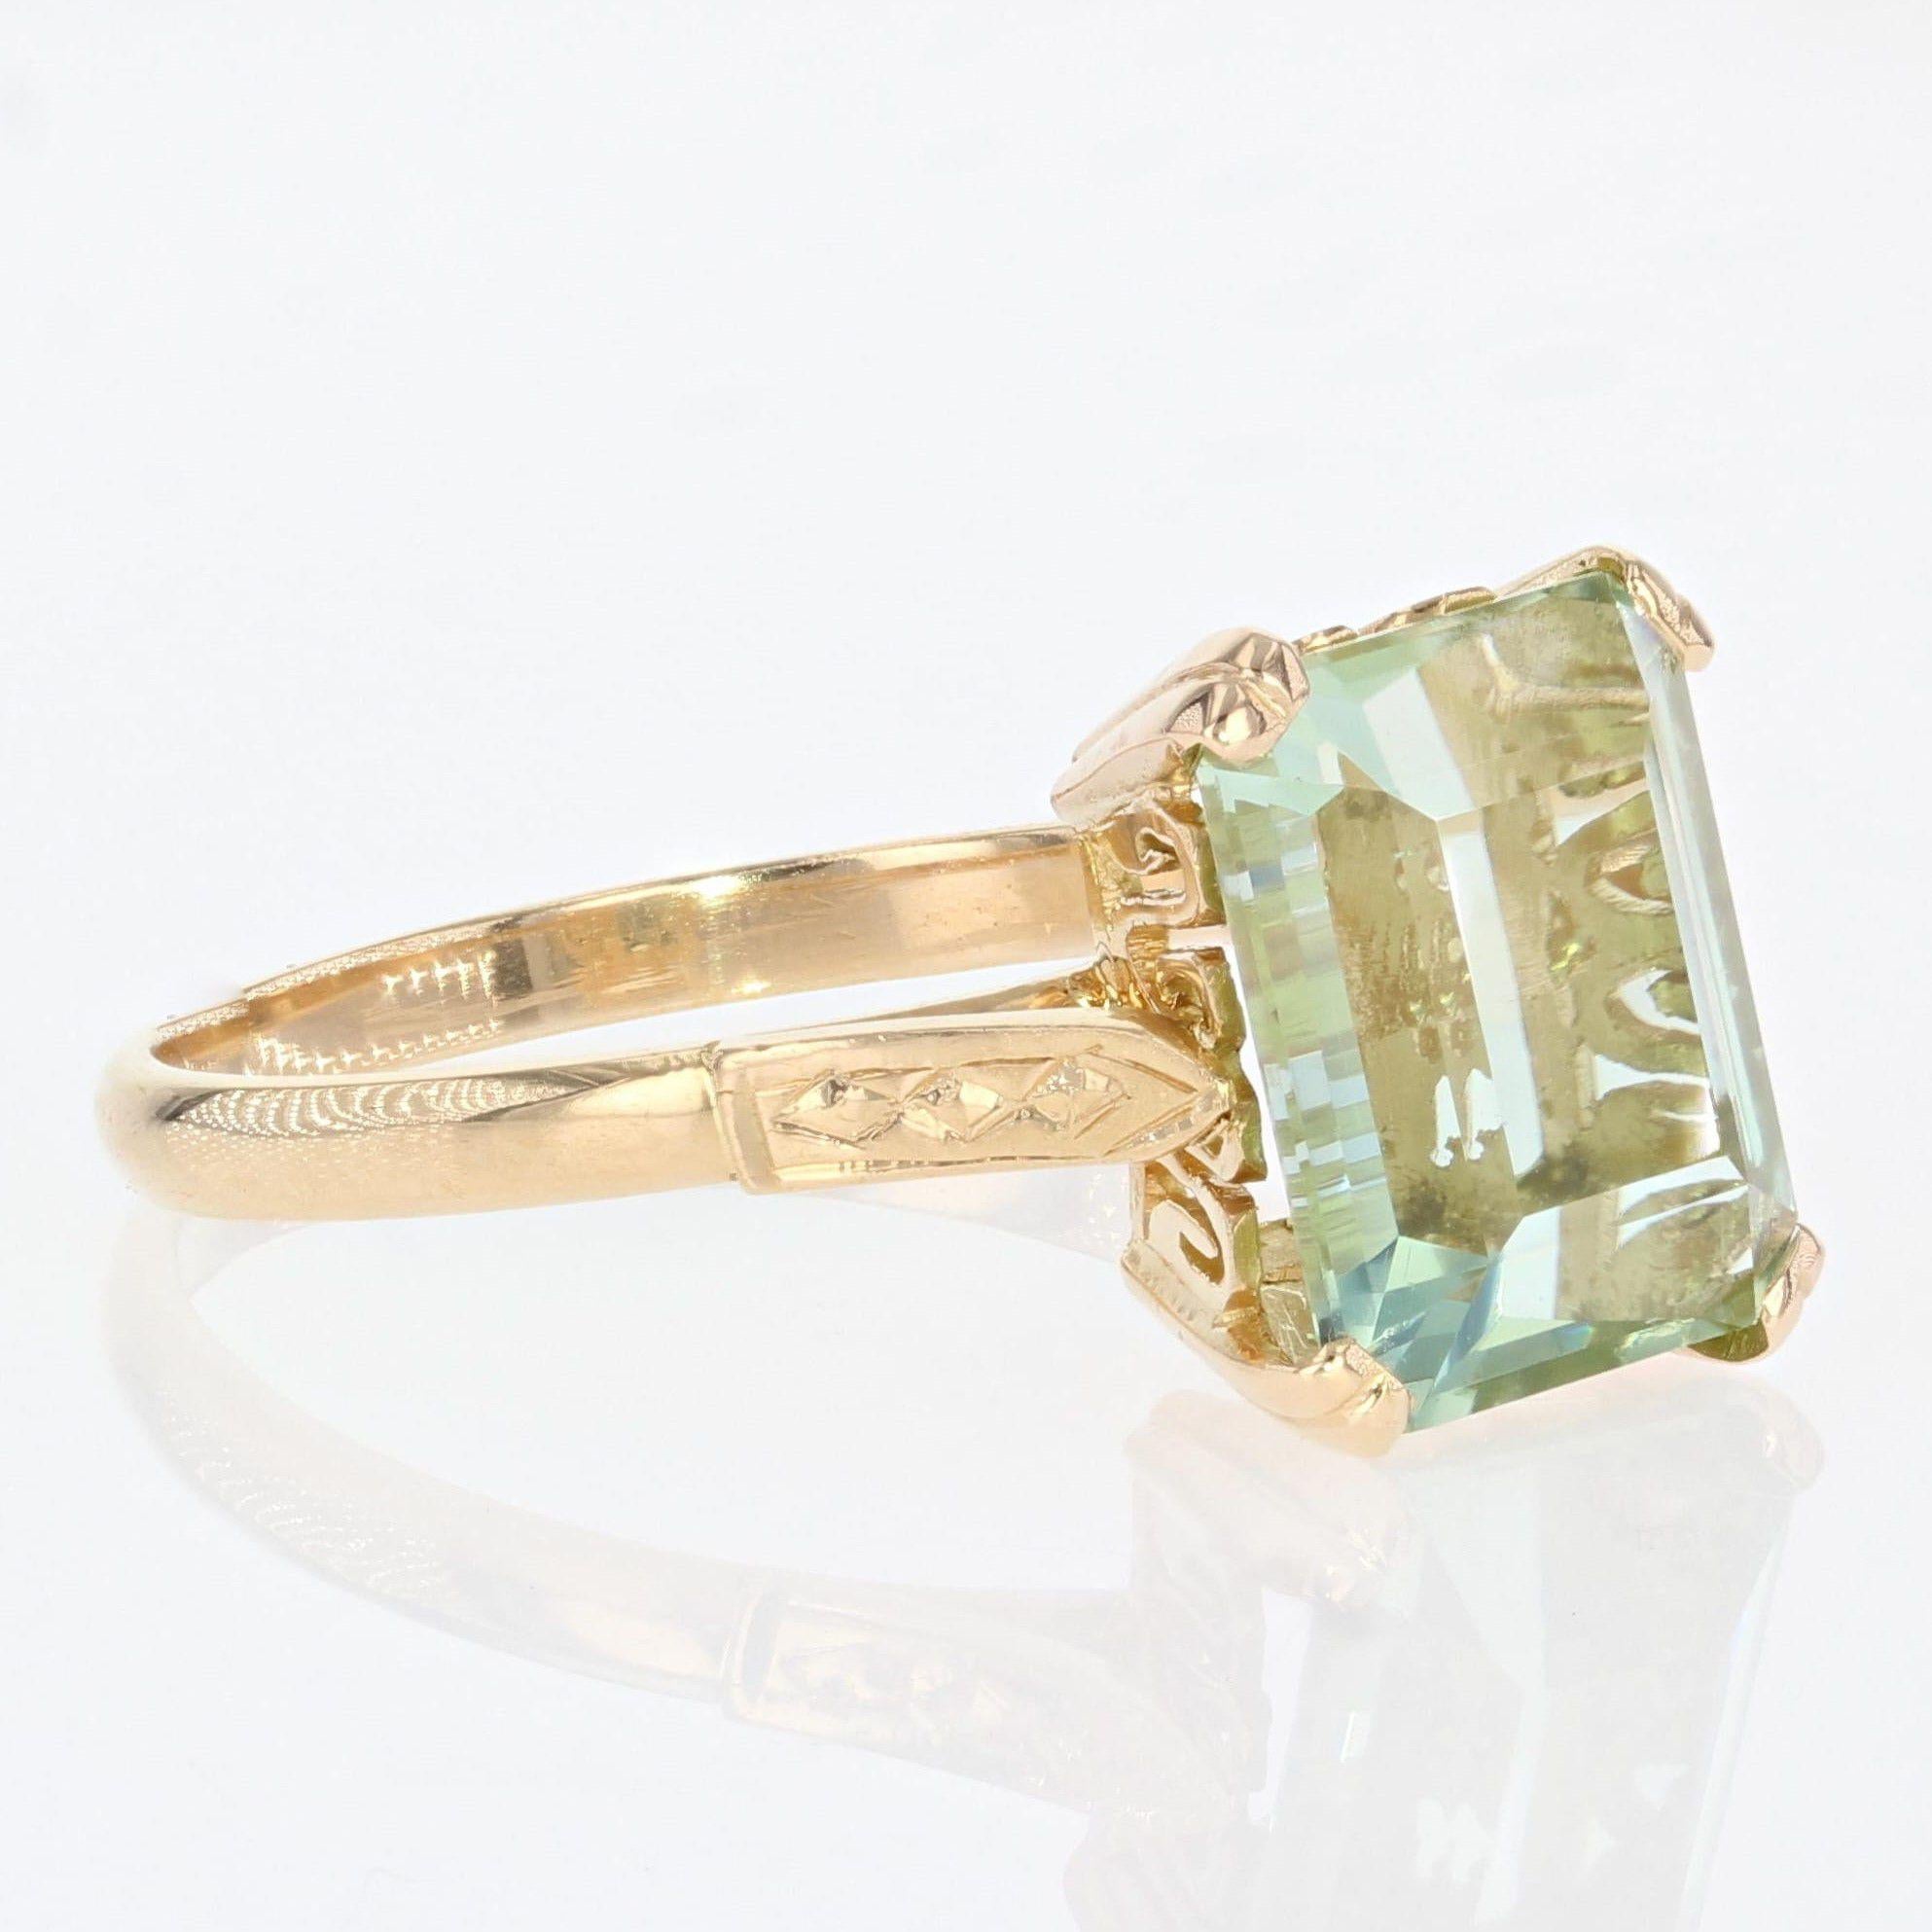 French 1960s 5.82 Carat Watermint Tourmaline 18 Karat Yellow Gold Ring For Sale 4